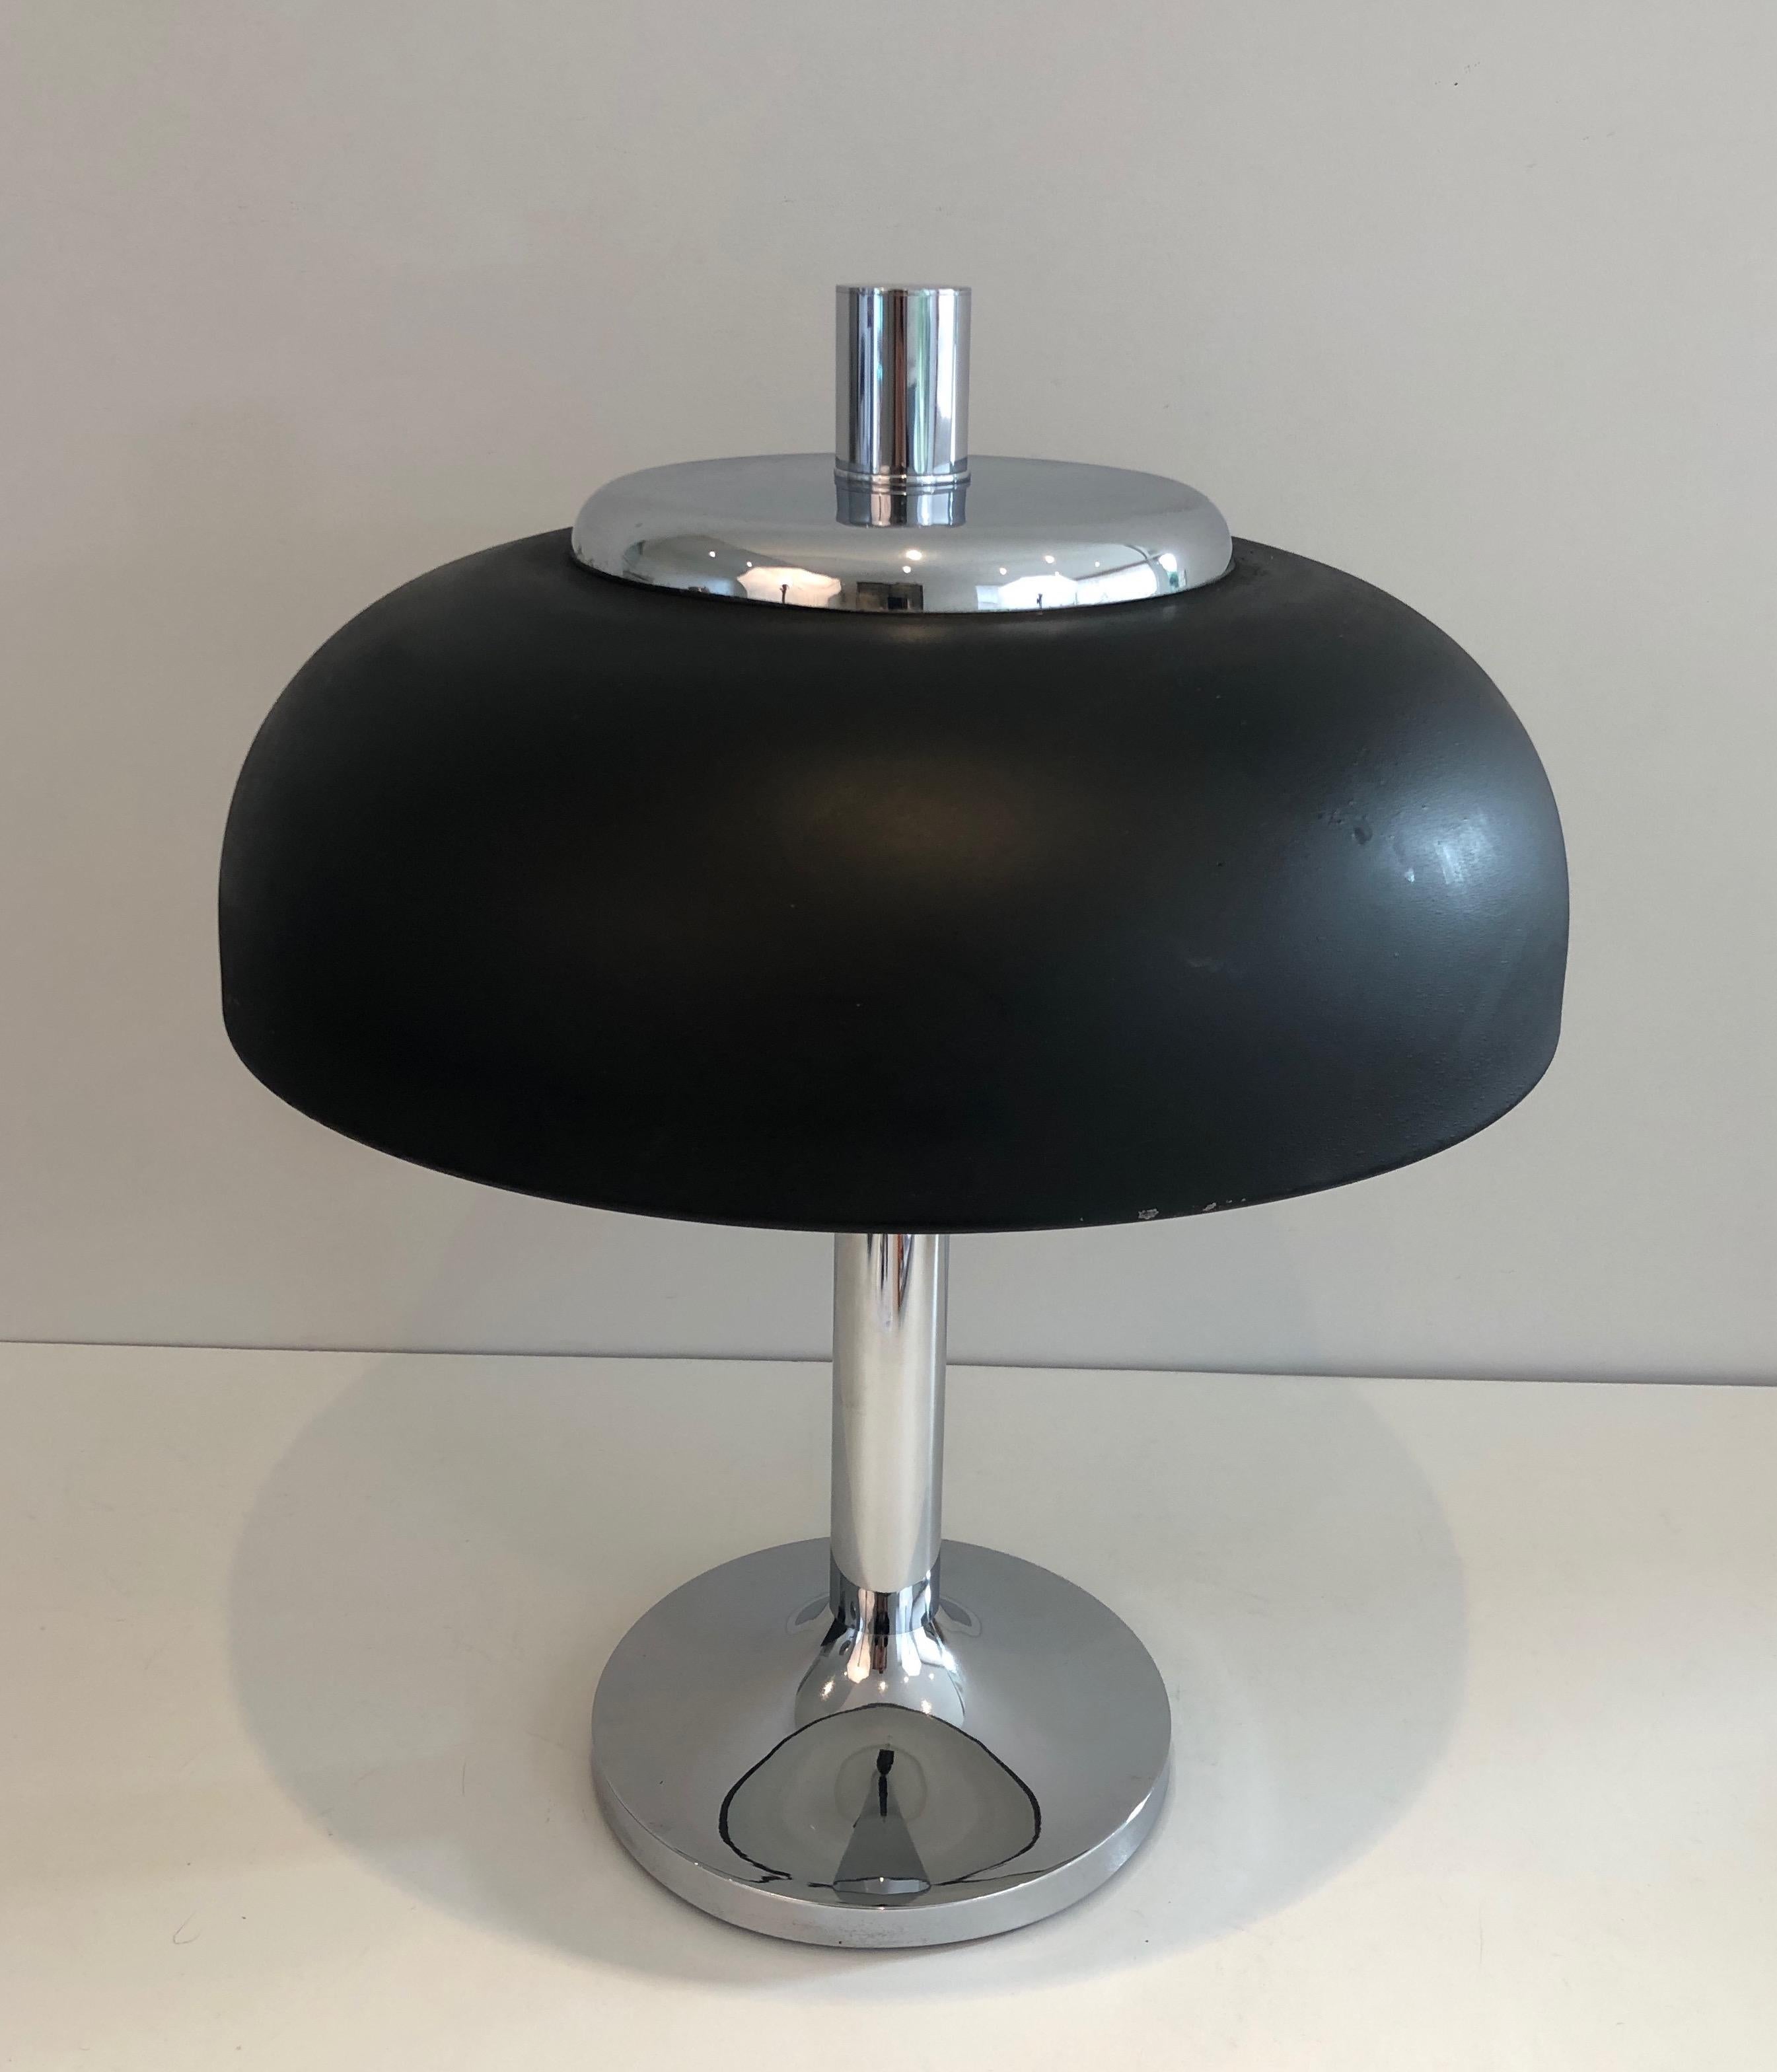 Large Chrome and Black Lacquered Design Table Lamp, French Work, circa 1950 For Sale 1